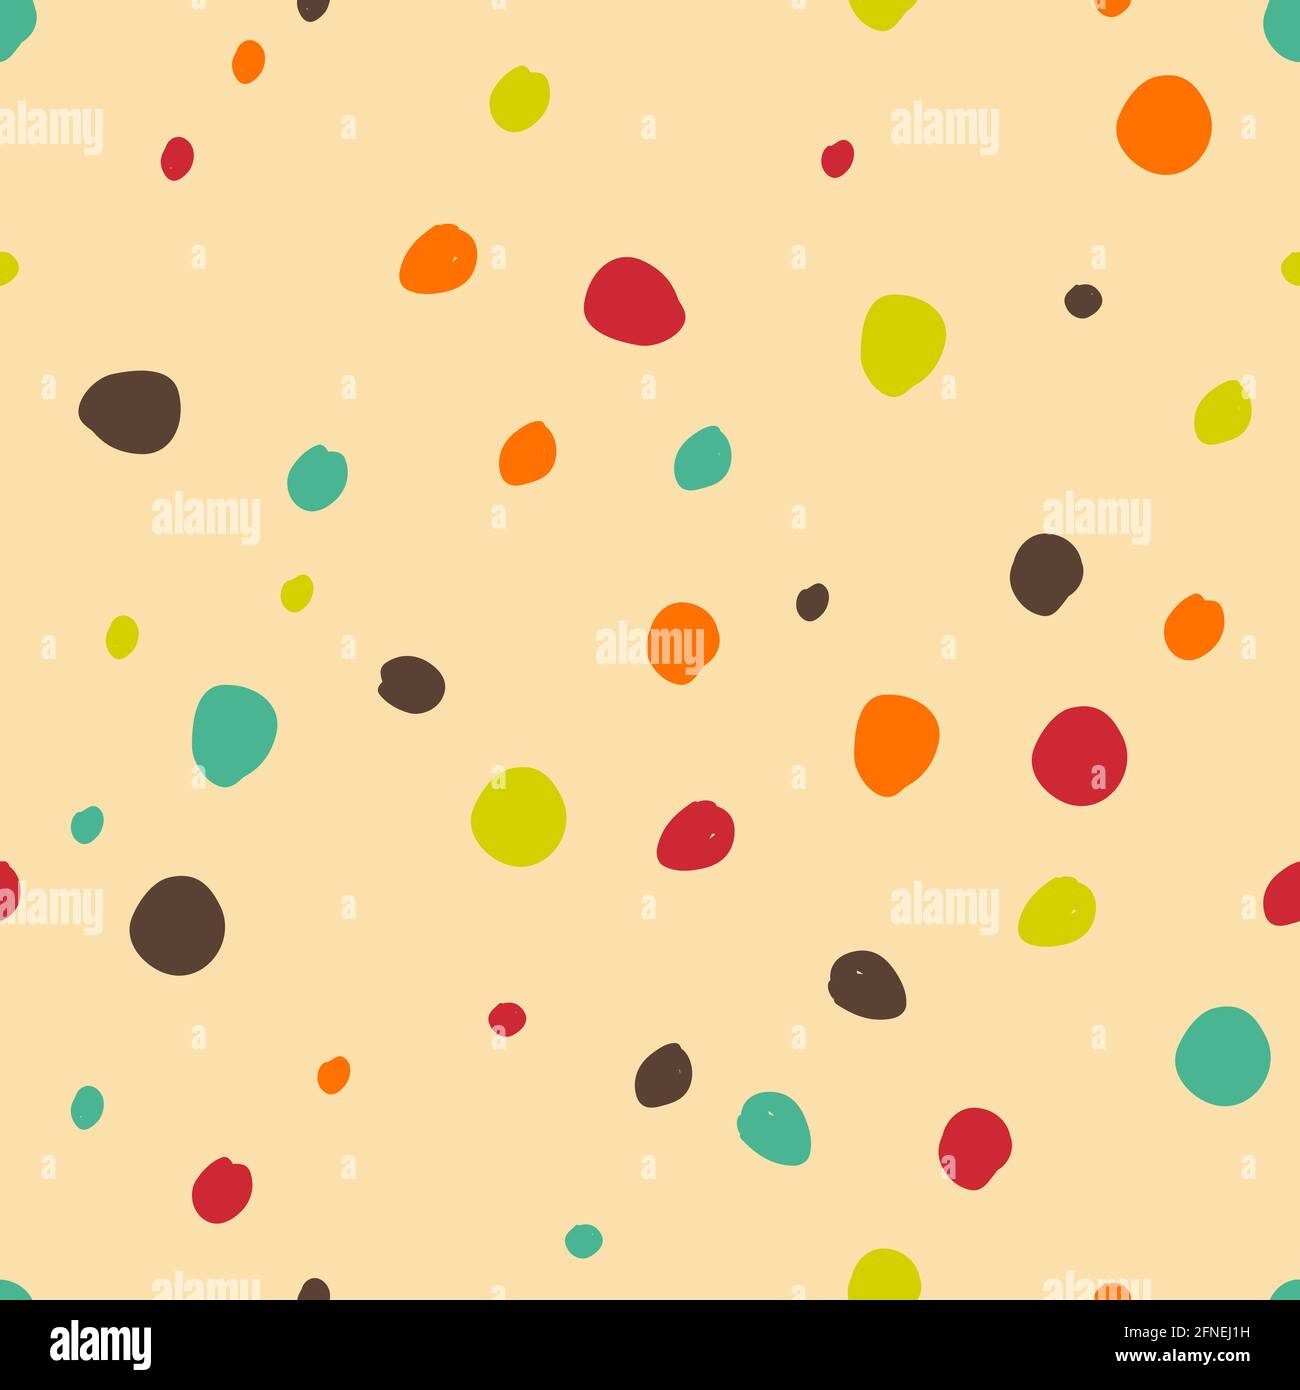 Polka dots seamless pattern. Creative texture for fabric, textile Stock Vector